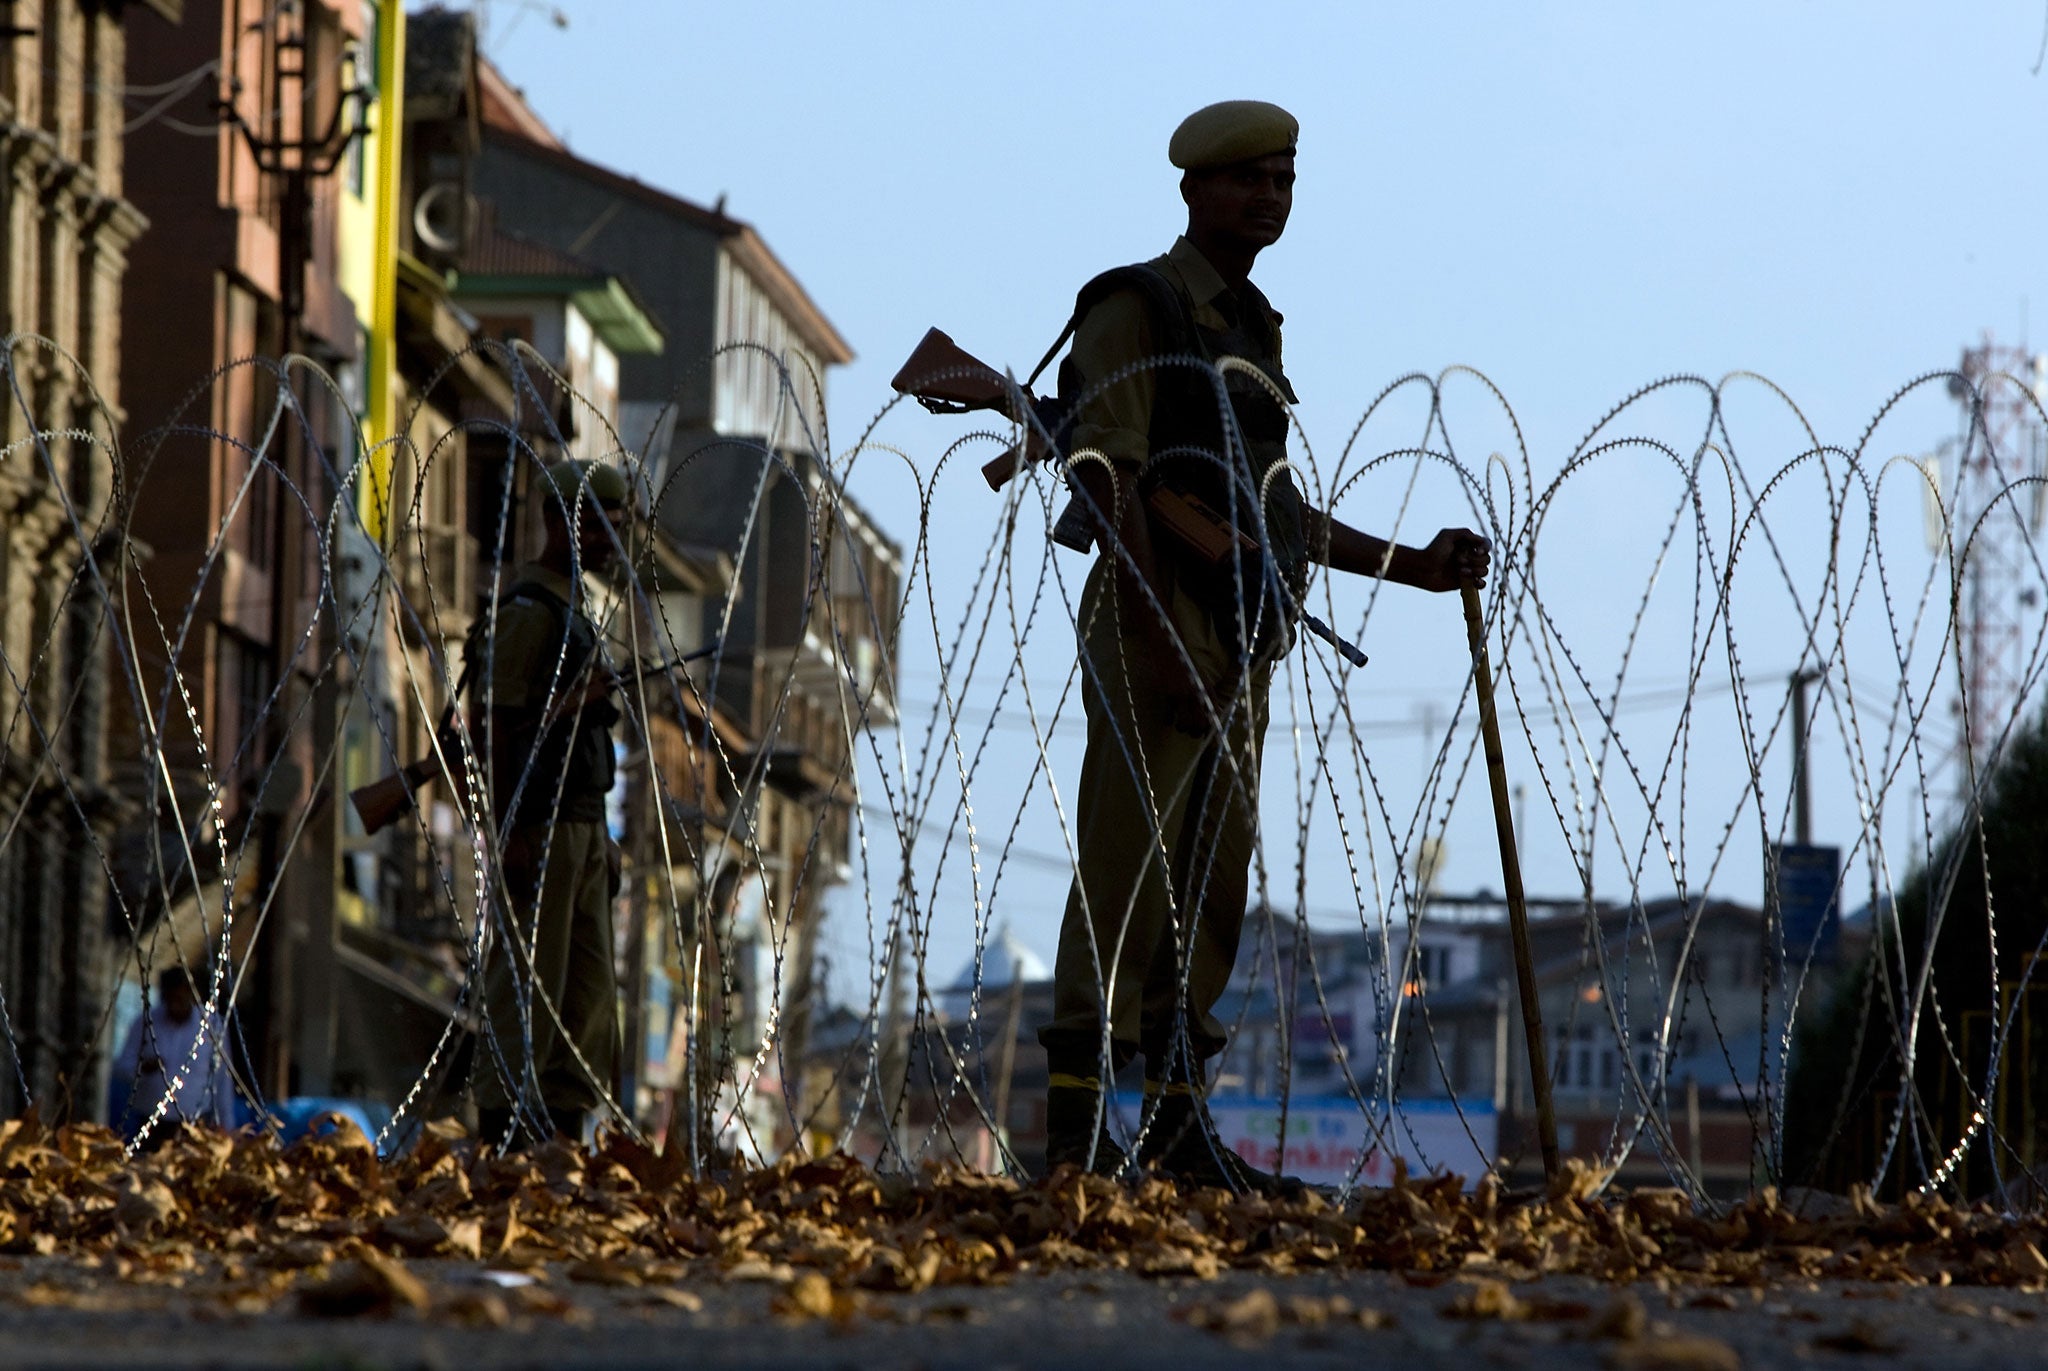 Indian security forces stand guard during a curfew October 6, 2008 in Srinagar, Kashmir, India